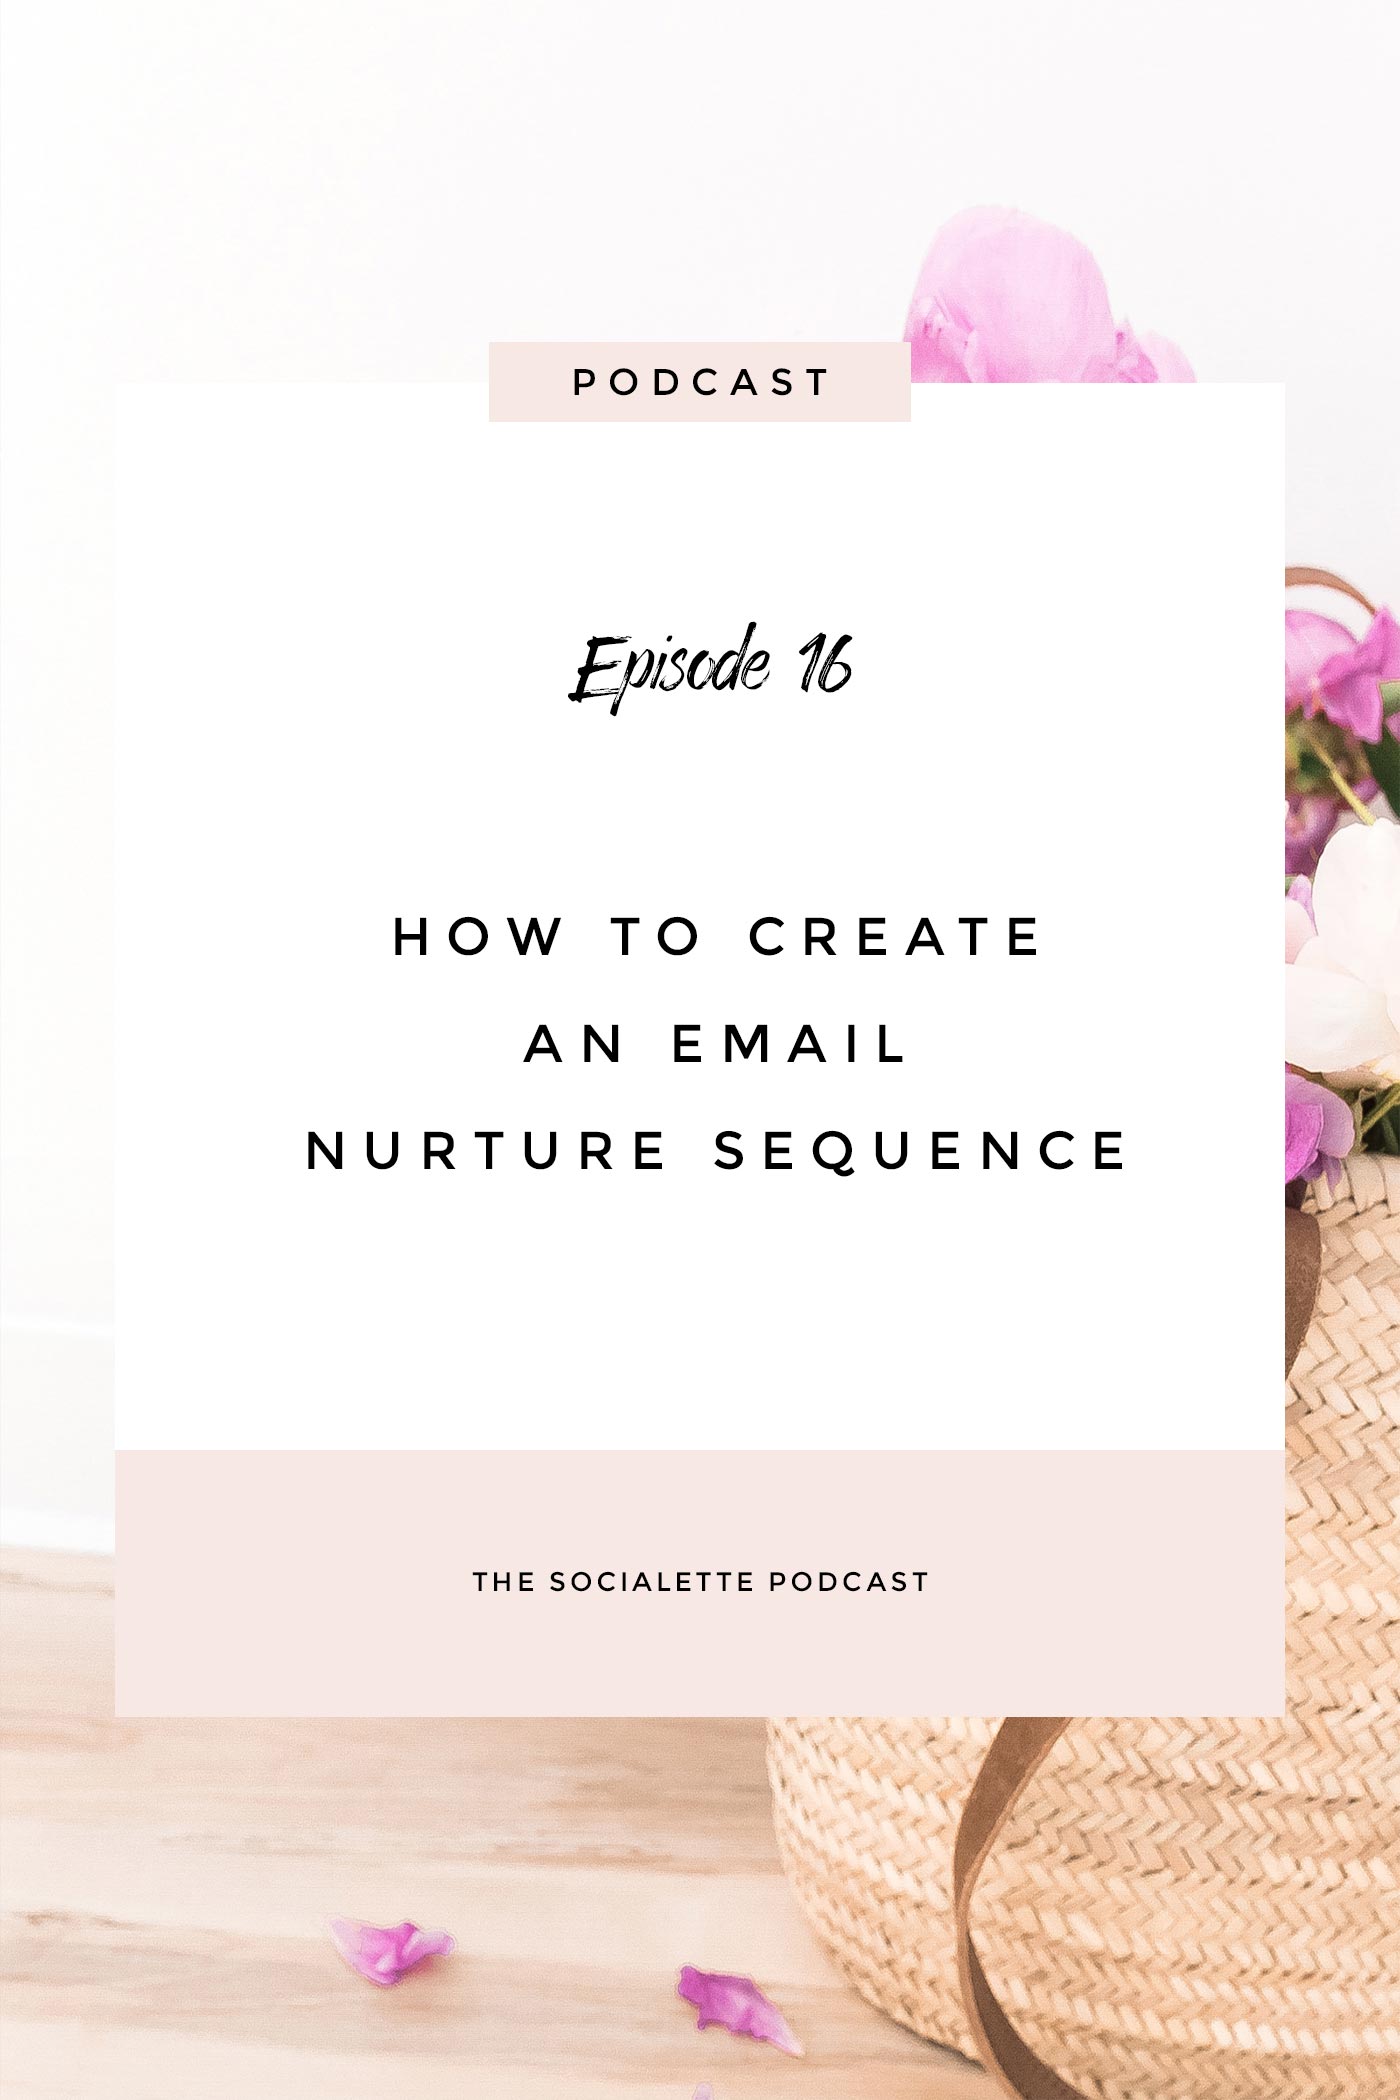 How to create an email nurture sequence